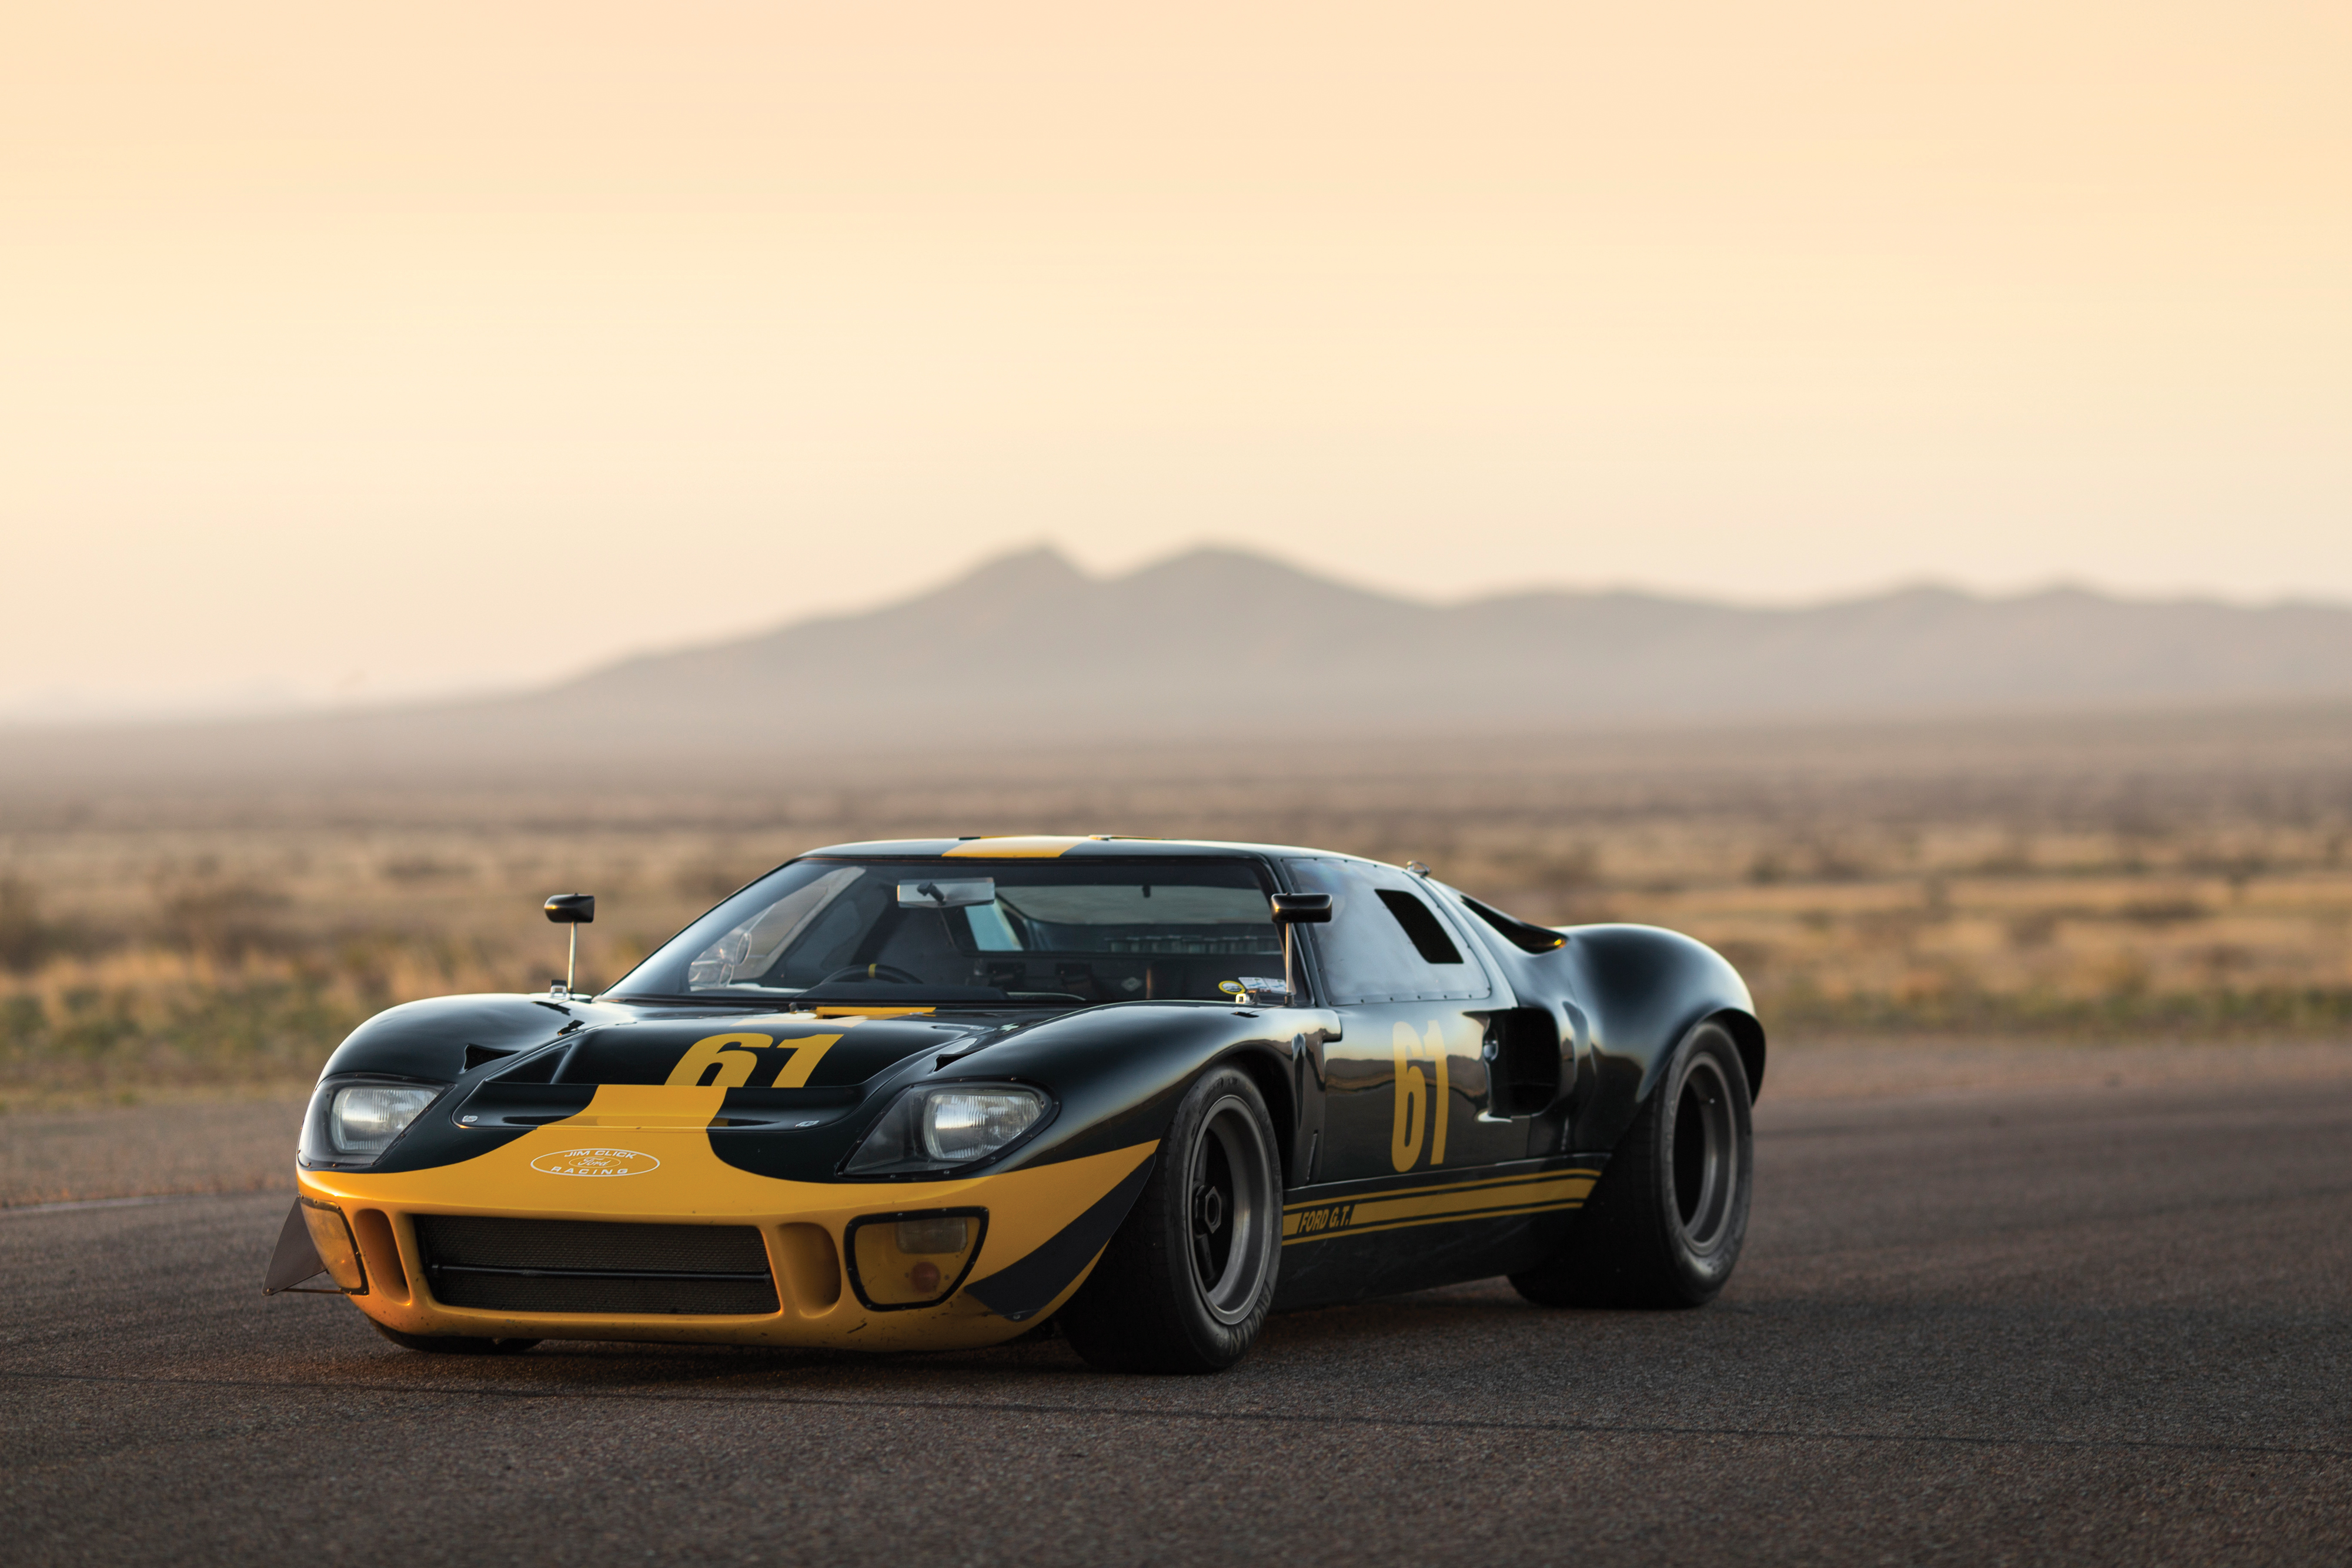 Gt4 gold. Форд gt40. Ford gt40 Shelby. Спорткар Ford gt40. Форд ЖТ 40.